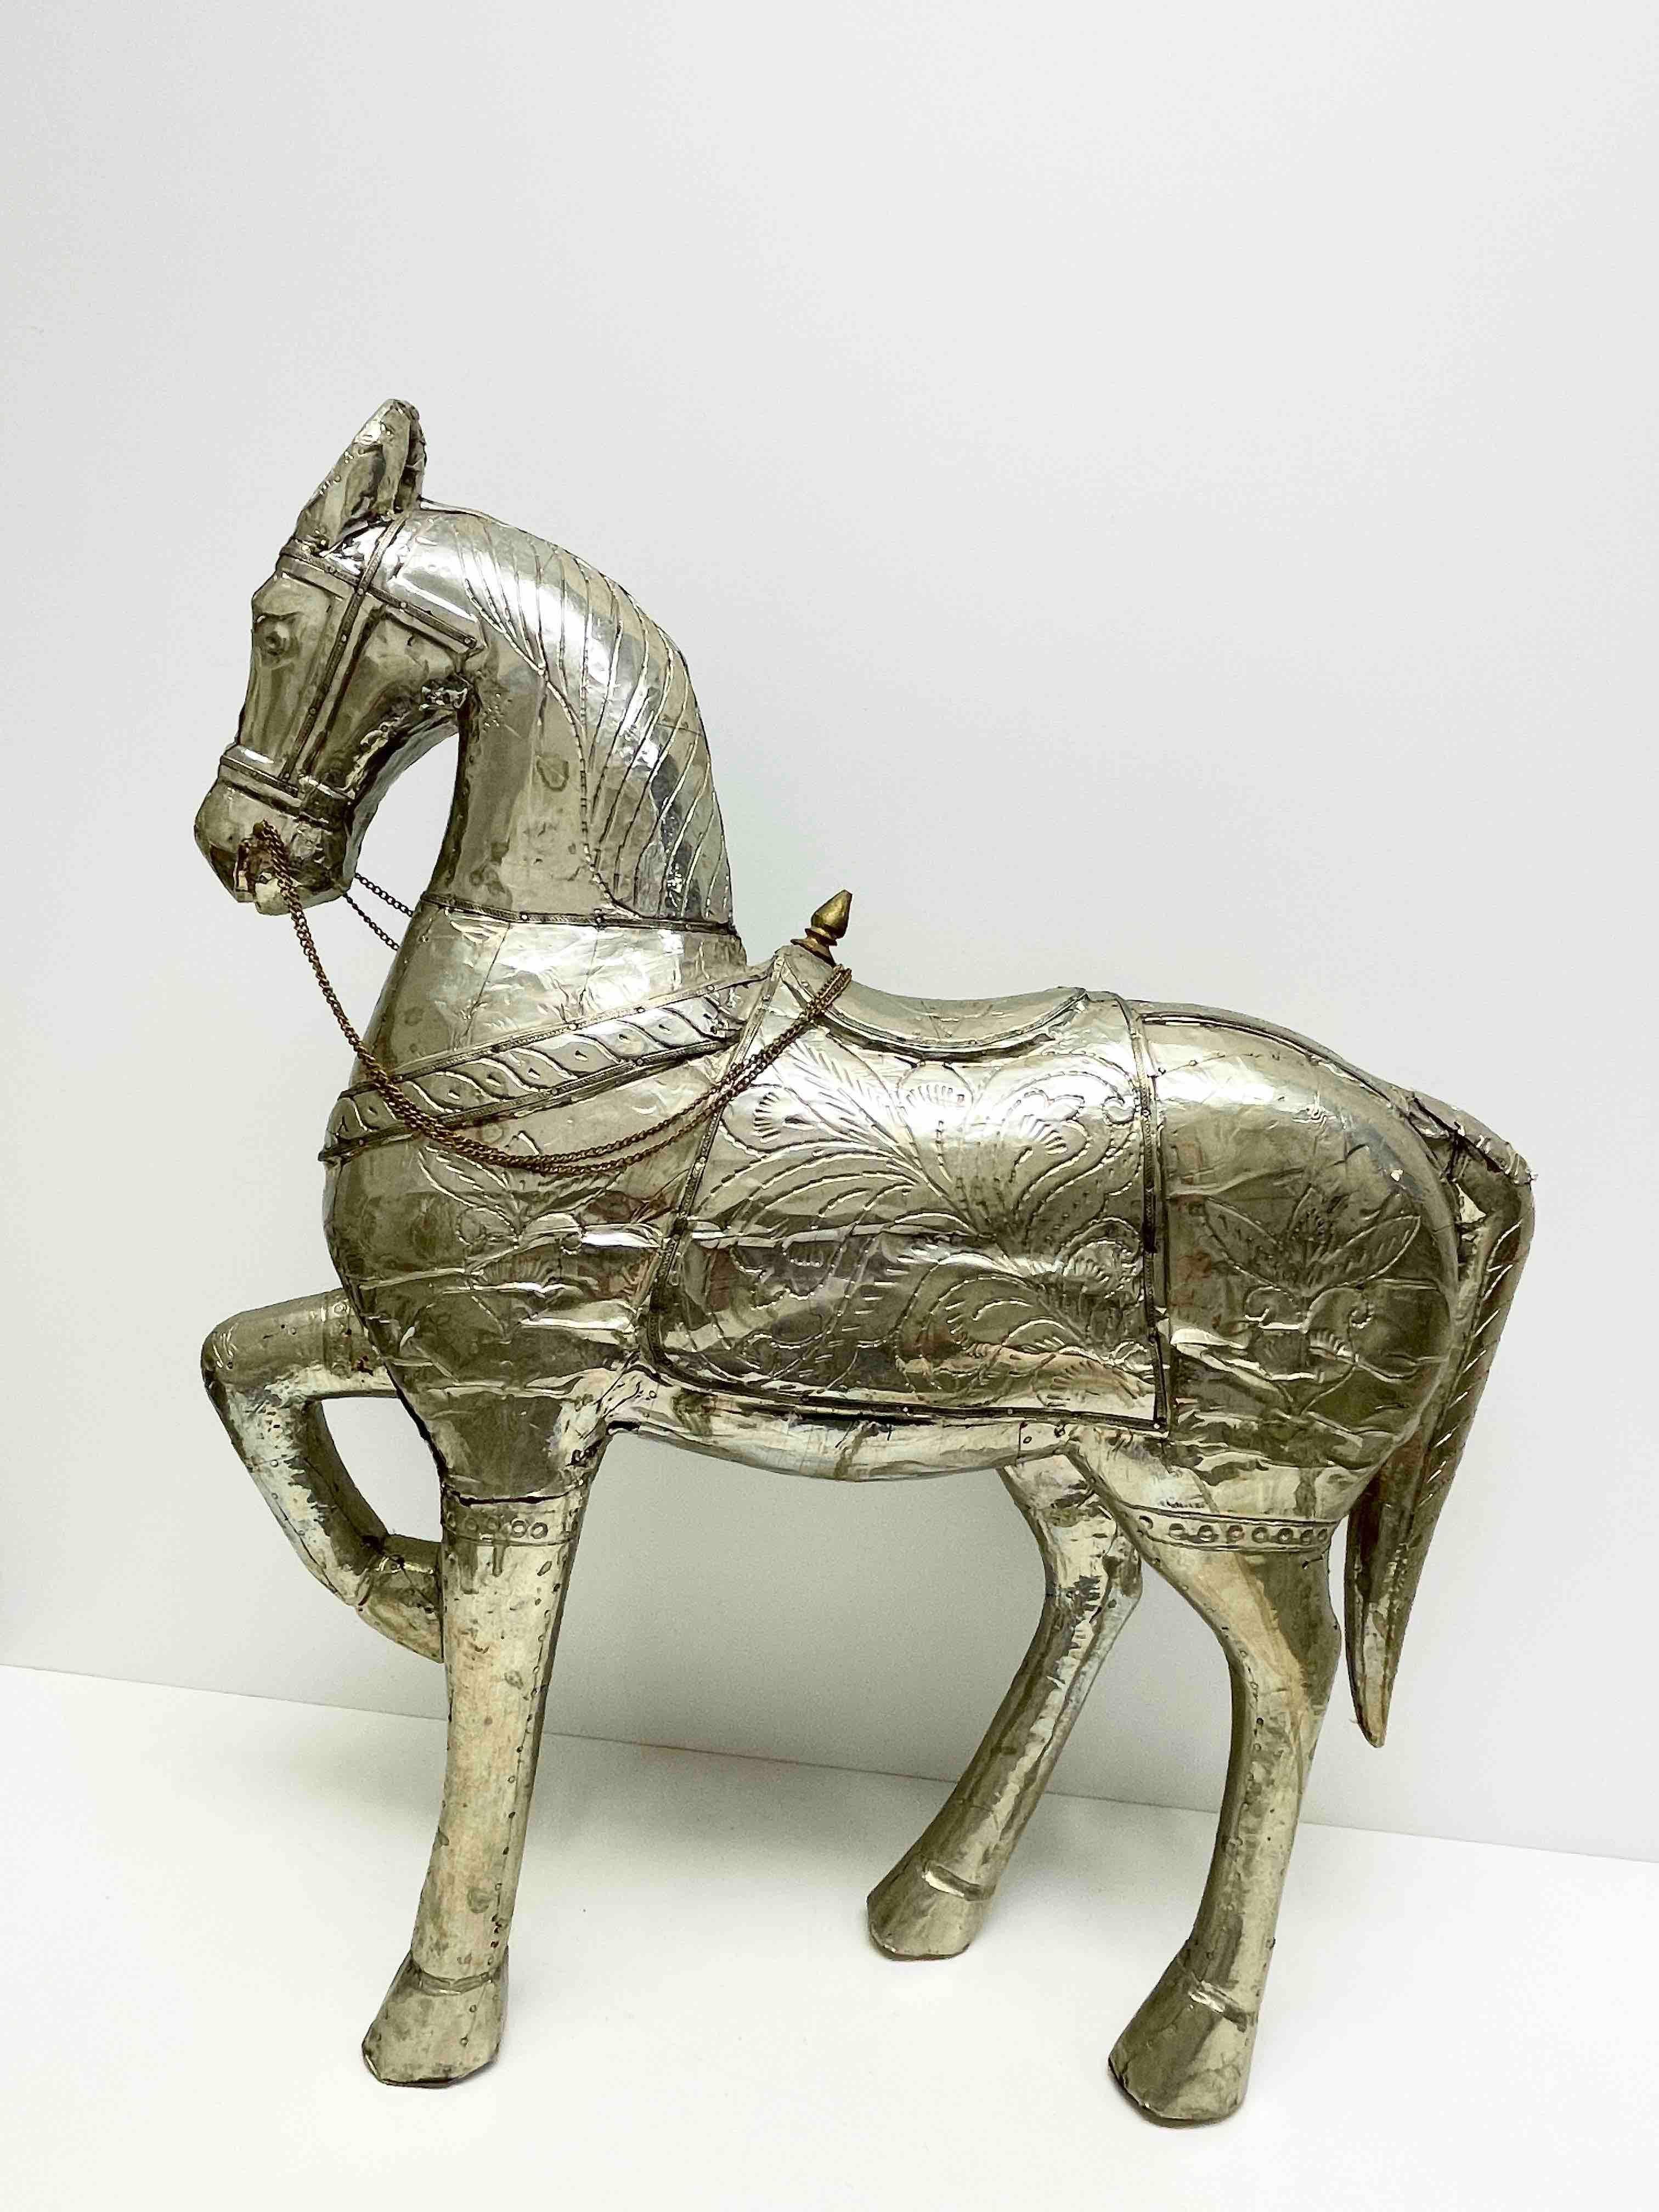 A beautiful decorative horse statue. Some wear with a nice patina, but this is old-age. Wooden horse coated with metal. Very decorative and nice to display in your library or any room.